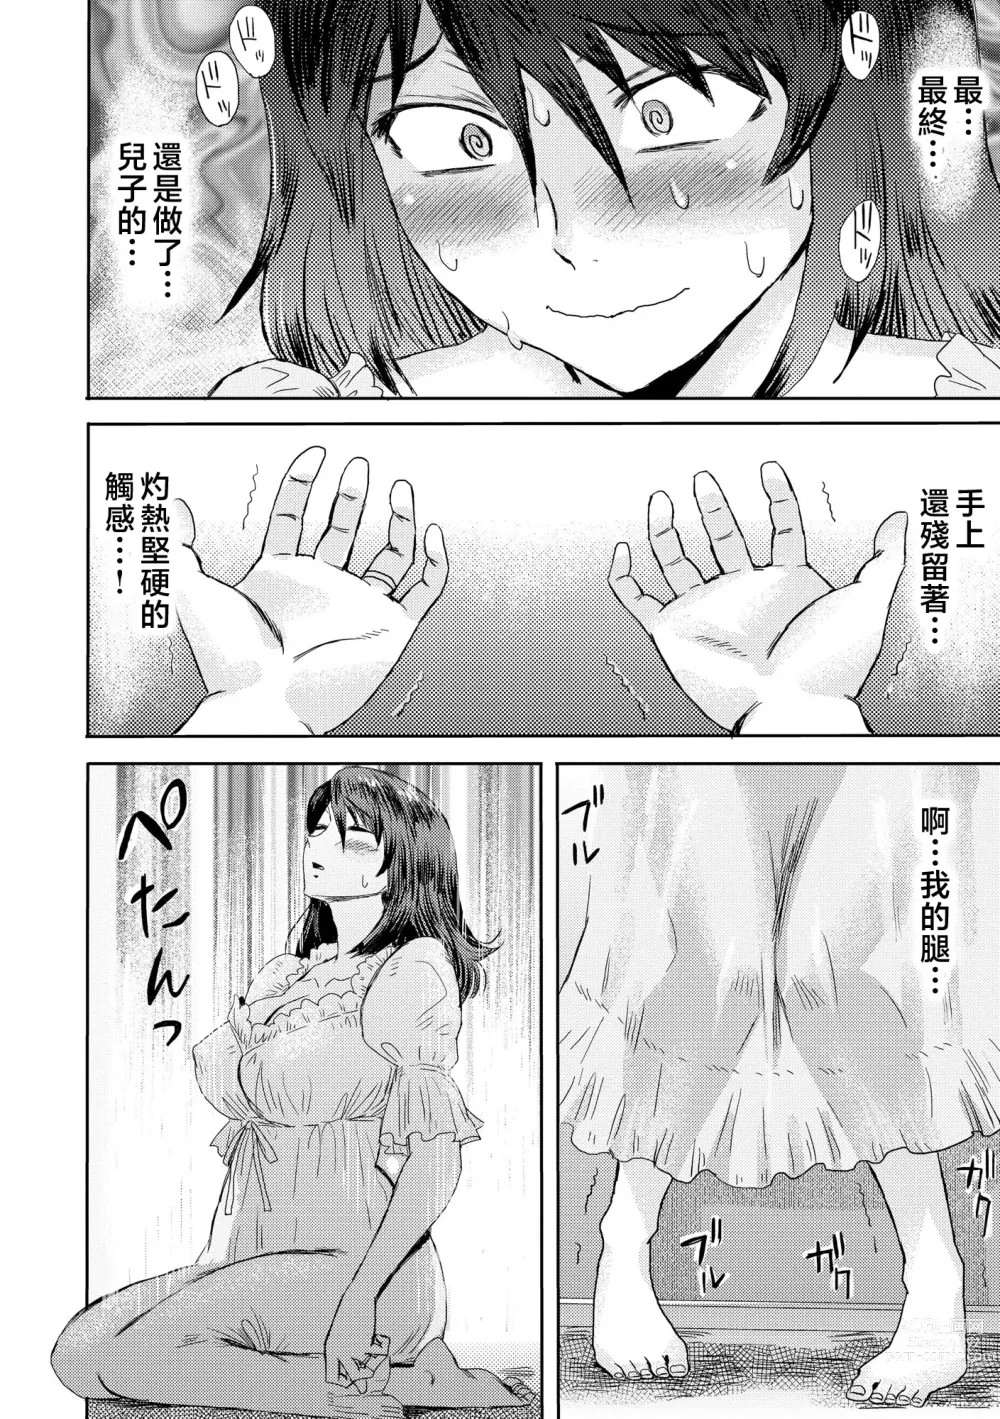 Page 9 of manga Soukan Syndrome Ch. 3 (decensored)